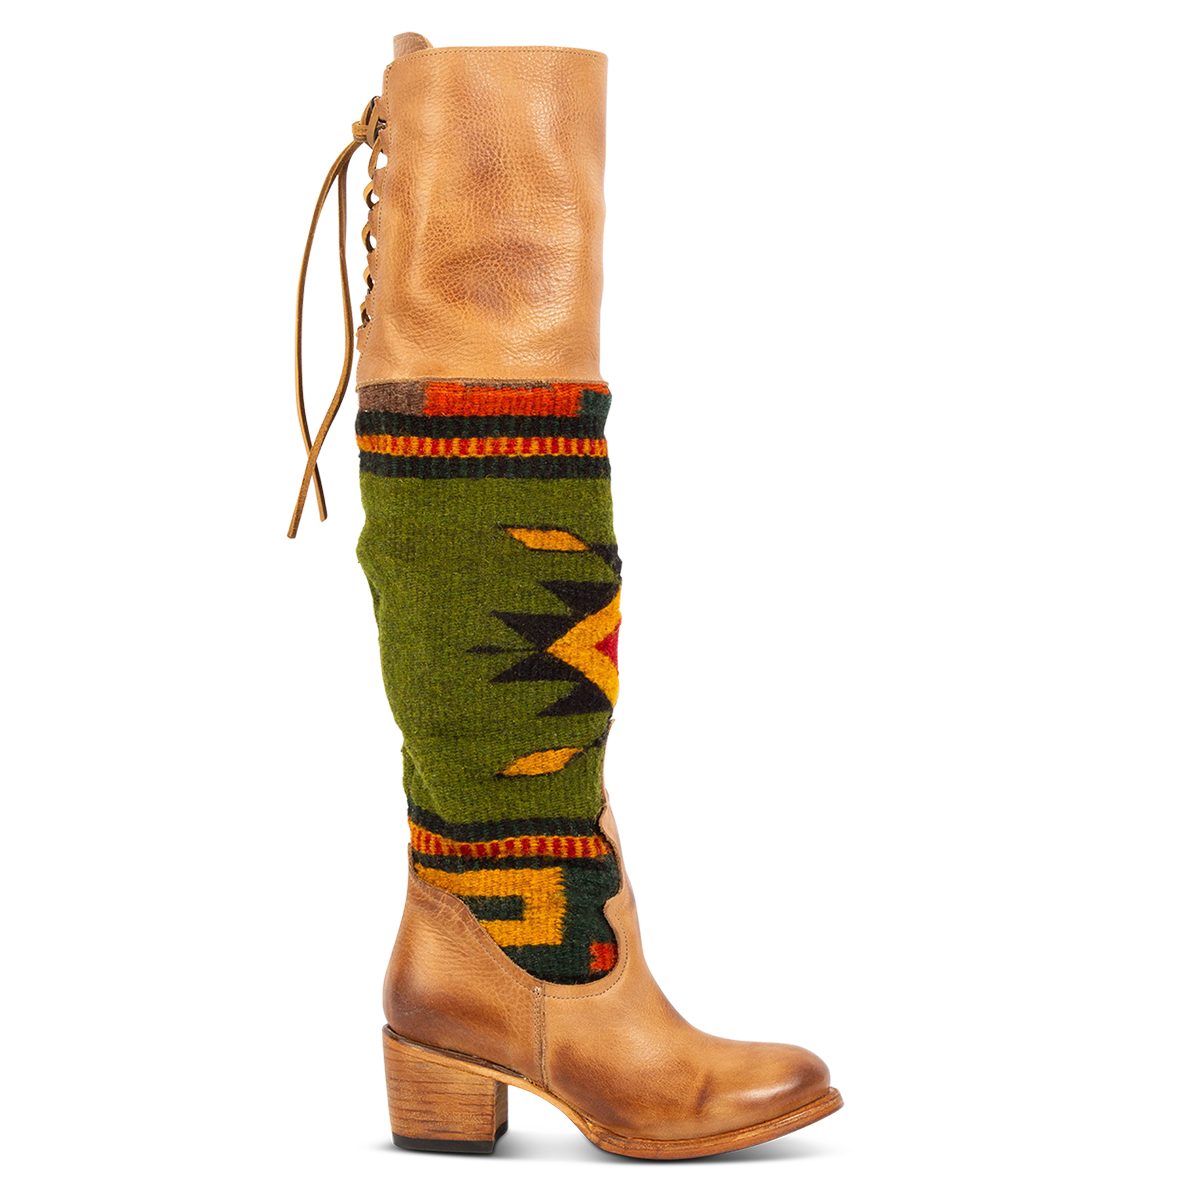 FREEBIRD women's Serape tan leather knee high boot with woven detailing, leather tie lacing and an inside working brass zip closure 